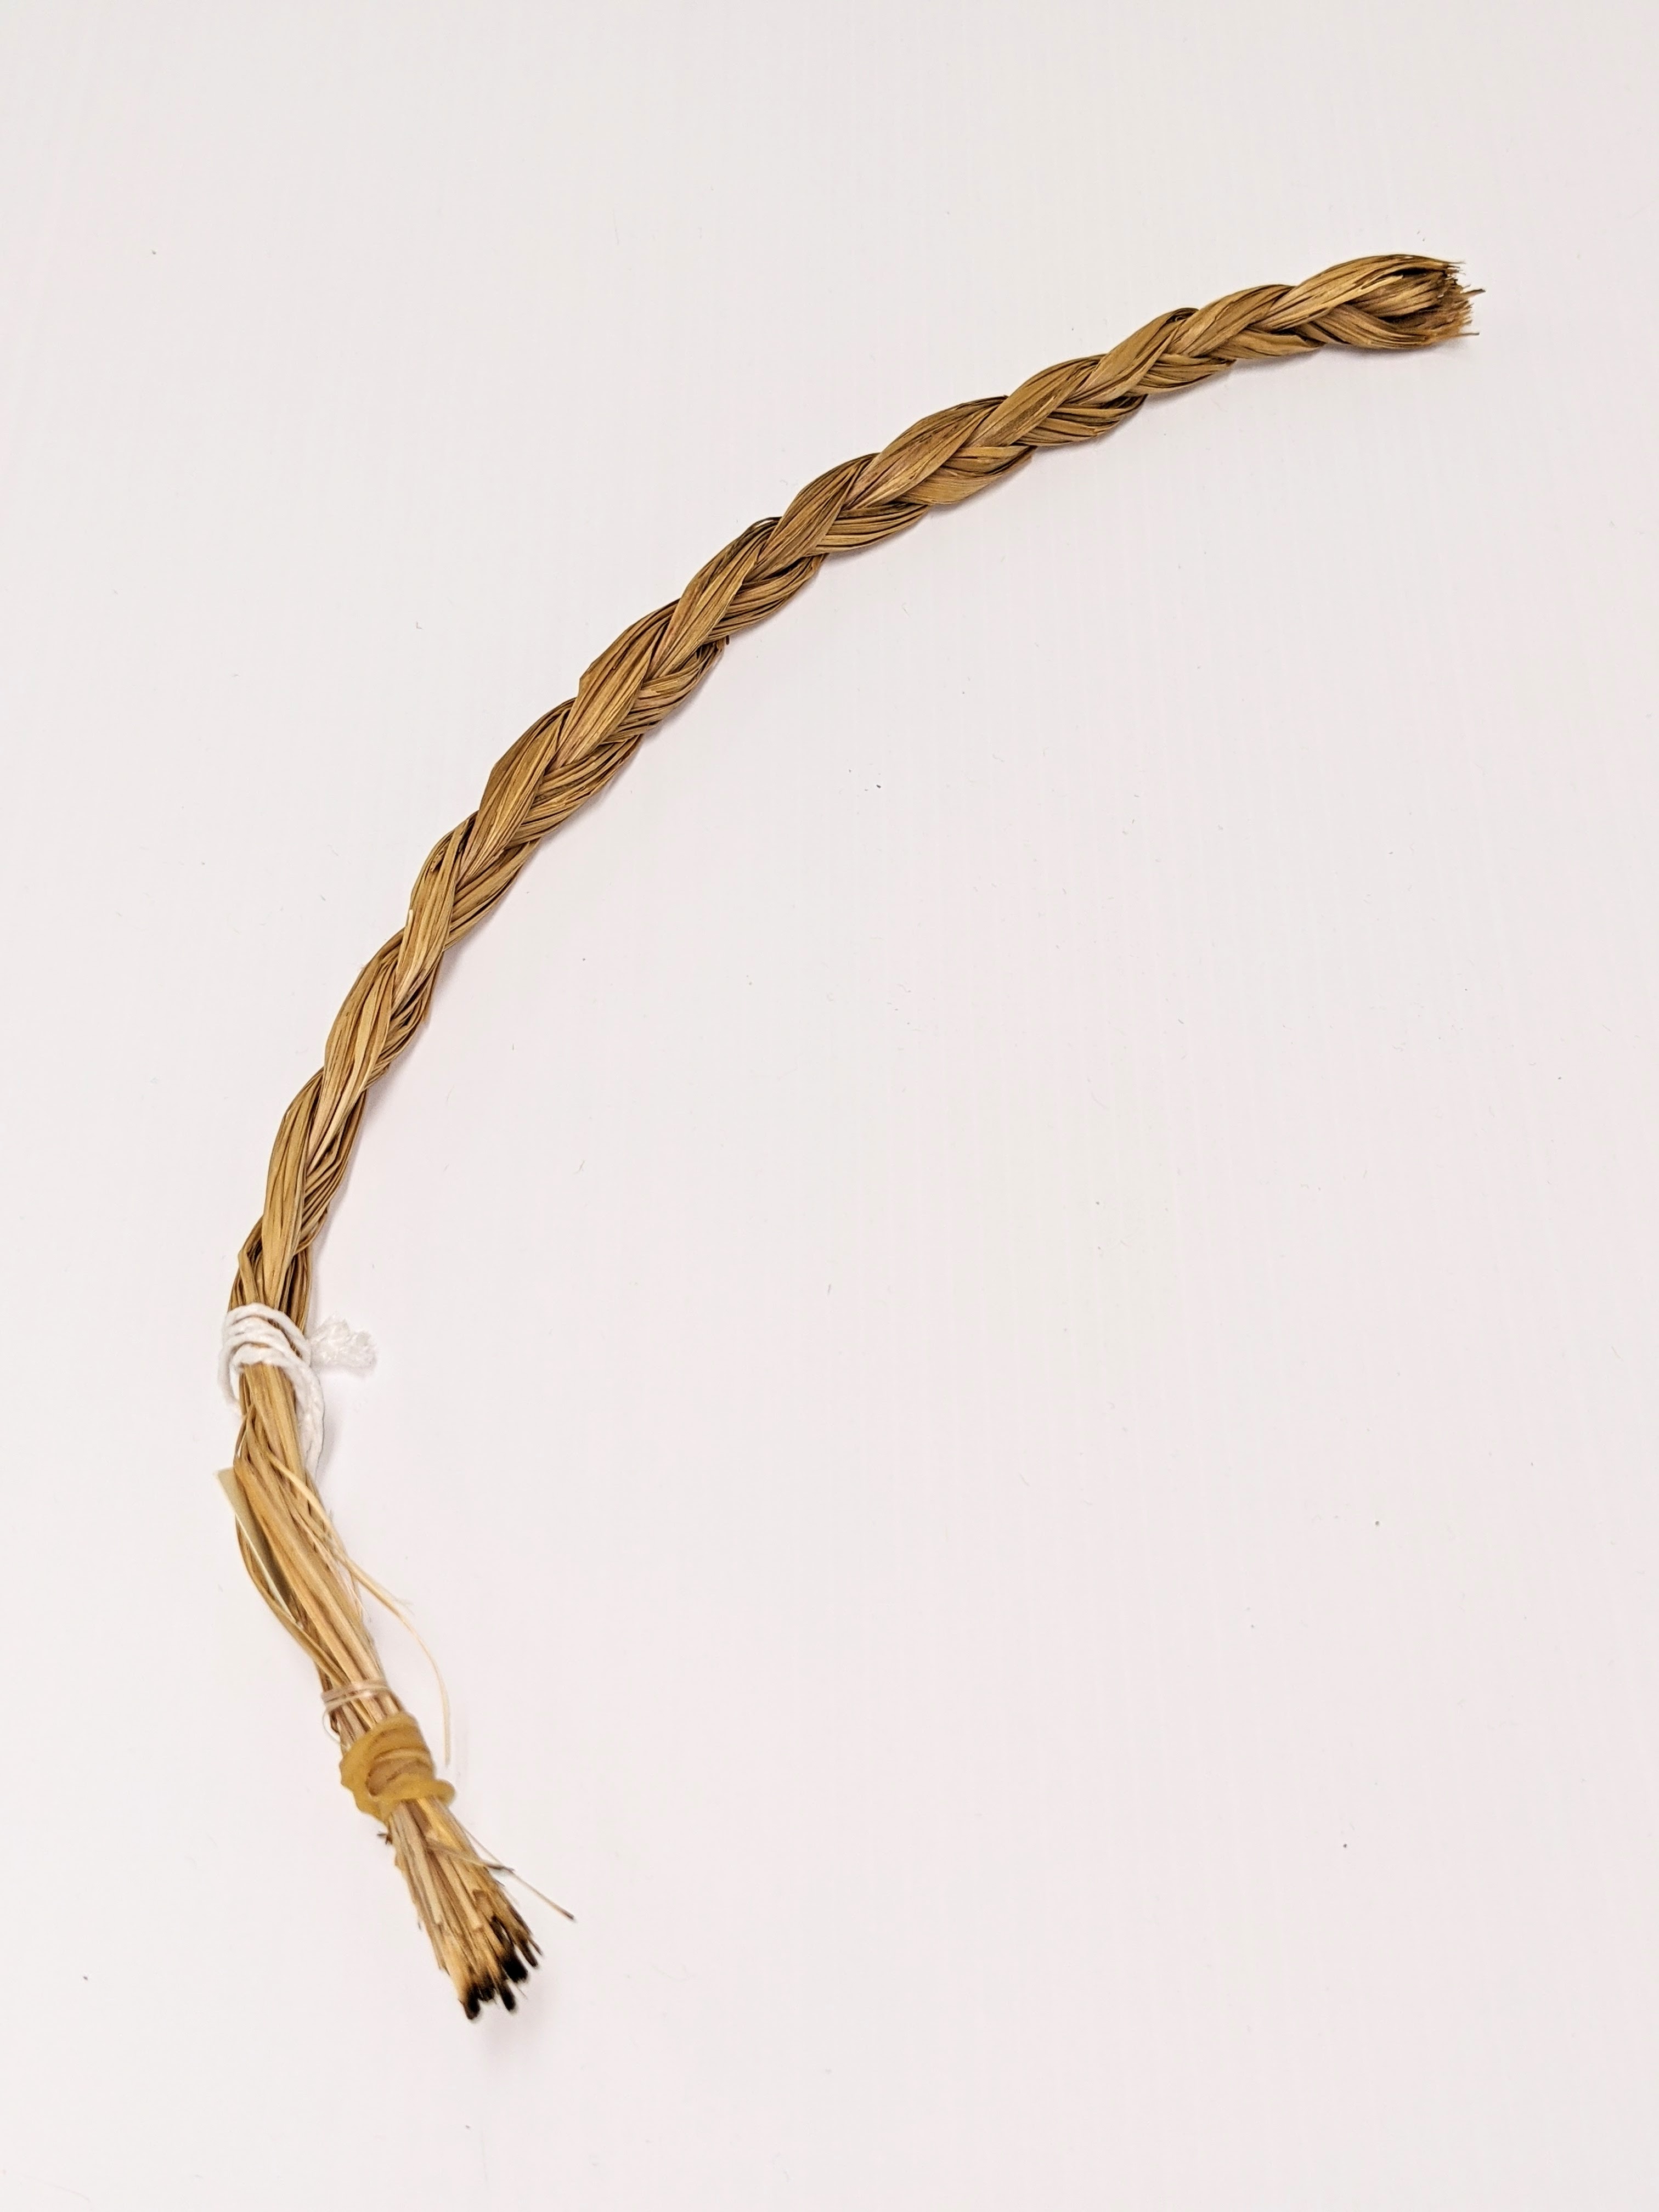 In honor of National Indigenous Peoples day on June 21, we have a braid of sweet grass for artifact of the week! Sweet grass is deemed as one of the 4 sacred medicines by Indigenous nations throughout North America and is used in Ceremony - specifically a Smudge Ceremony. Ceremonies are an integral part of Indigenous culture and way of life, the smudging ceremony is used to cleanse the spirits of individuals, the ceremonial space and attract positive spirits. Sweetgrass is braided (as shown in the image), lit on one end (see burn marks on bottom) and waved about the room to cleanse the space with the fragrant smoke that attracts positive spirits.

21/06/2021
1999.03.93 / Hitchcock, Eunice